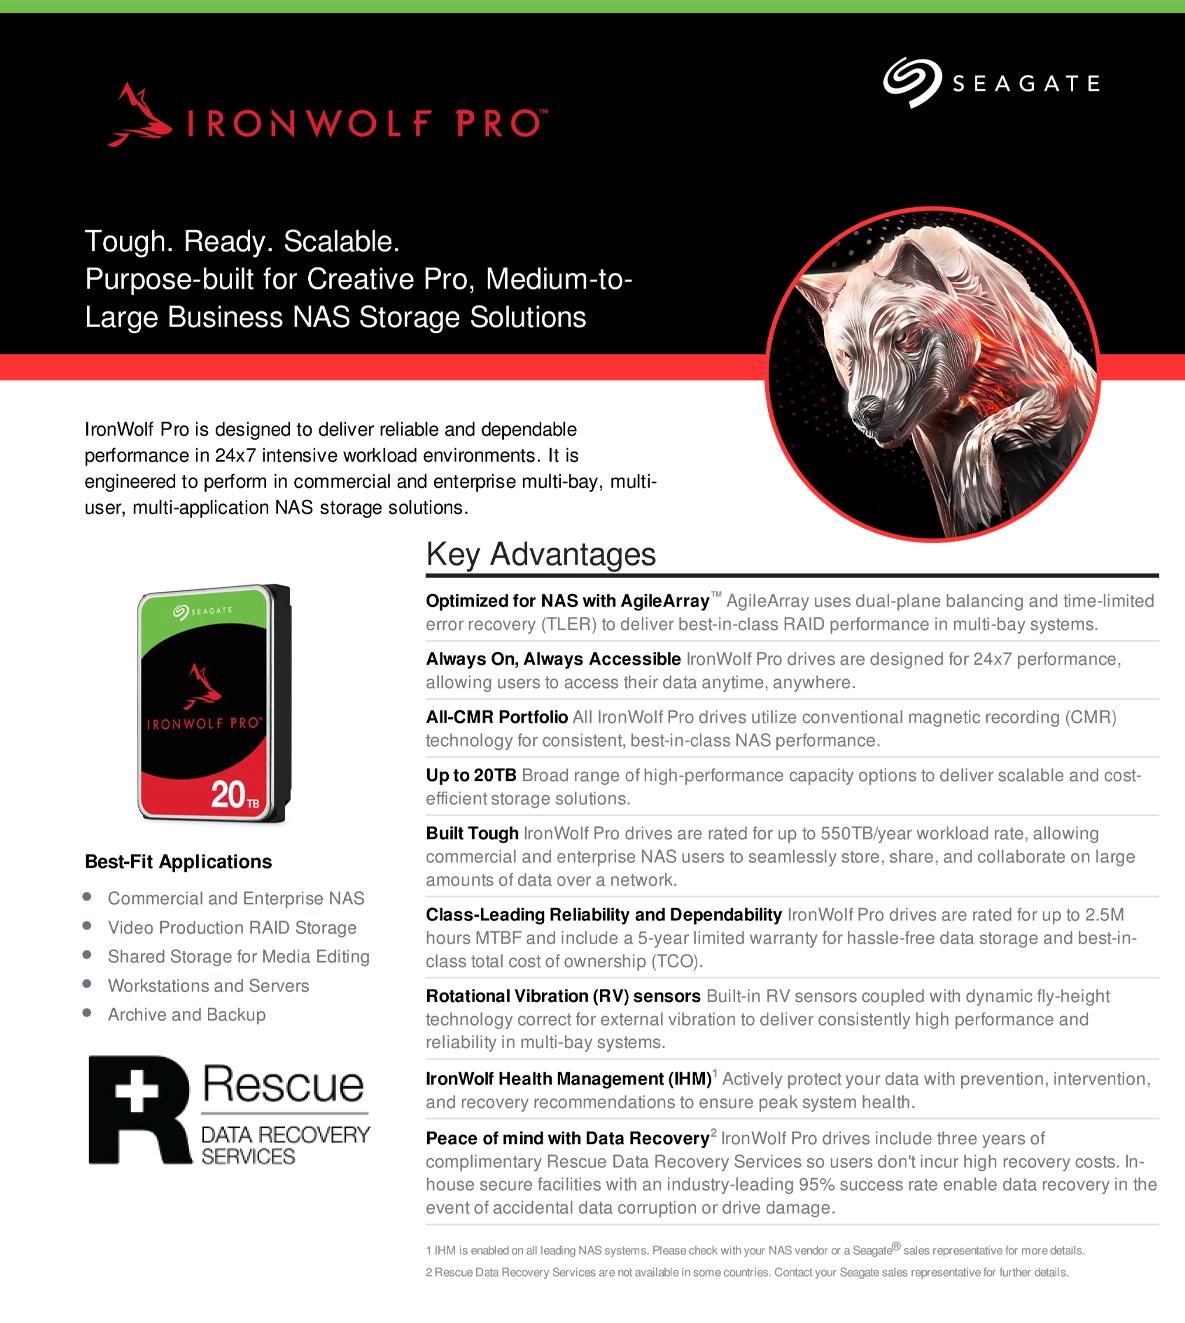 A large marketing image providing additional information about the product Seagate IronWolf Pro 3.5" NAS HDD - 16TB 256MB - Additional alt info not provided